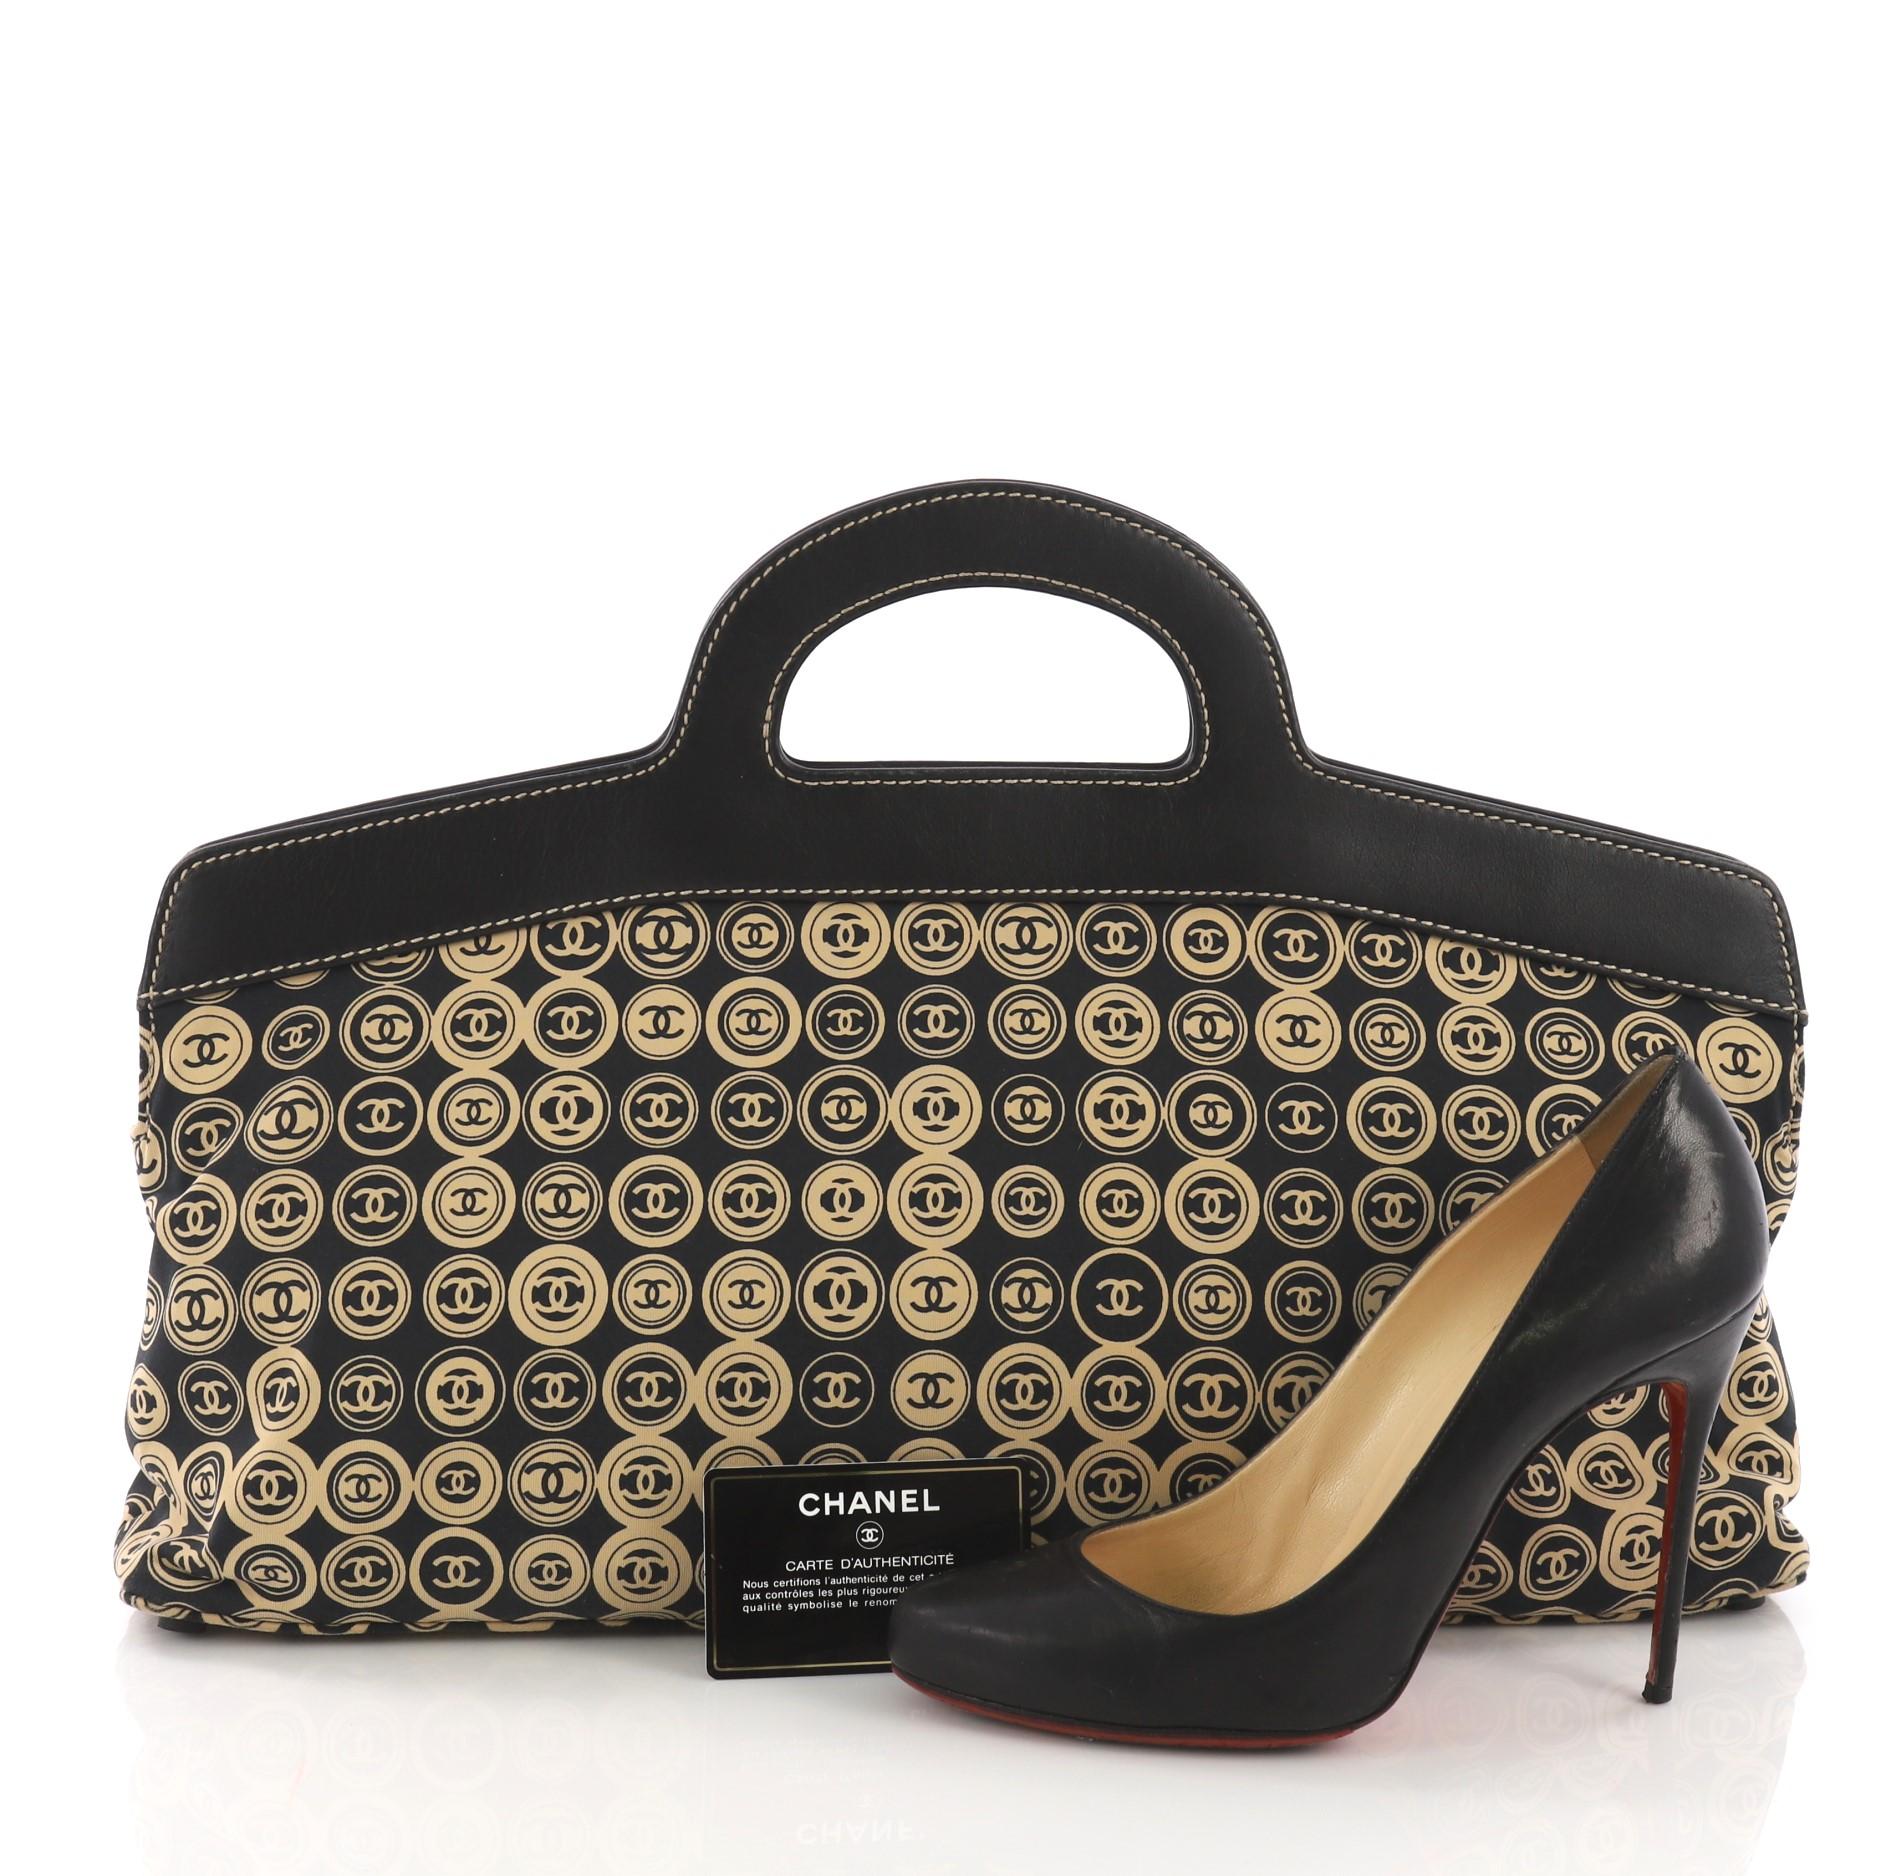 This Chanel Vintage Frame Handle Bag Printed Canvas Large, crafted from black printed canvas, features a frame top with dual cut out handles and gold-tone hardware. Its magnetic snap button closures opens to a navy fabric interior with slip pocket.